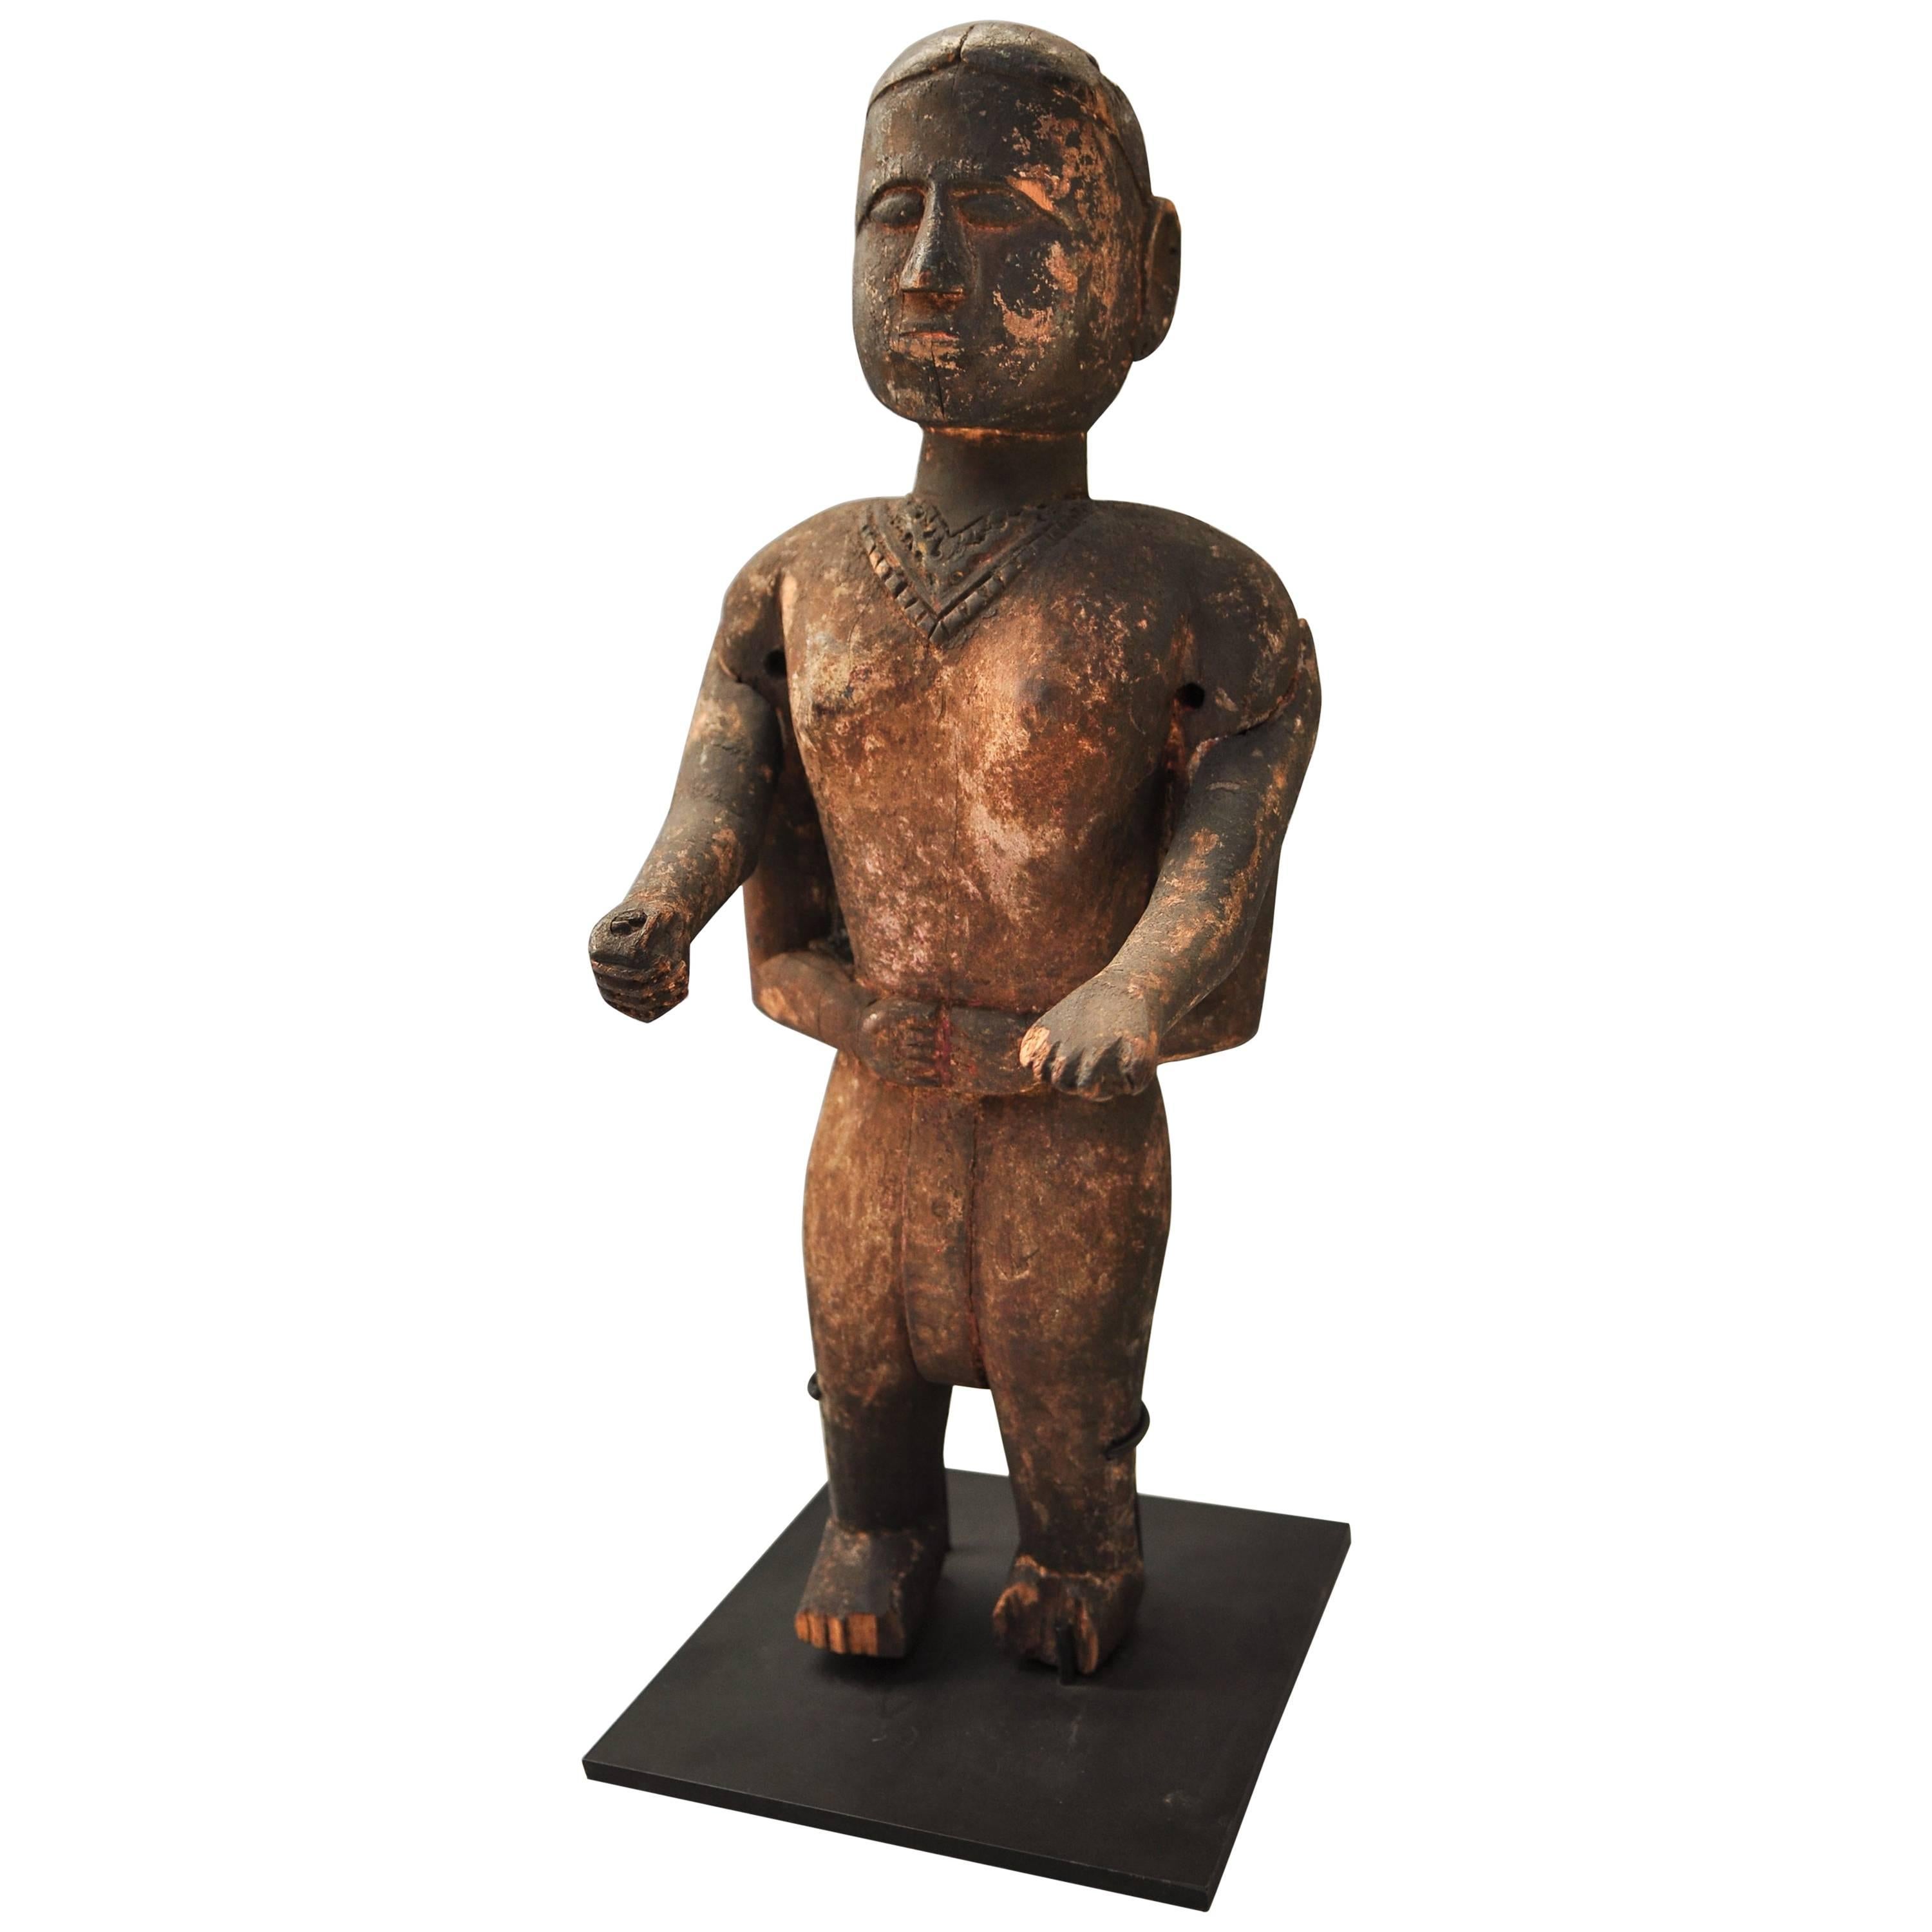 Wood Carved Statue Tharu People Southern Nepal, Early-Mid 20th Century.